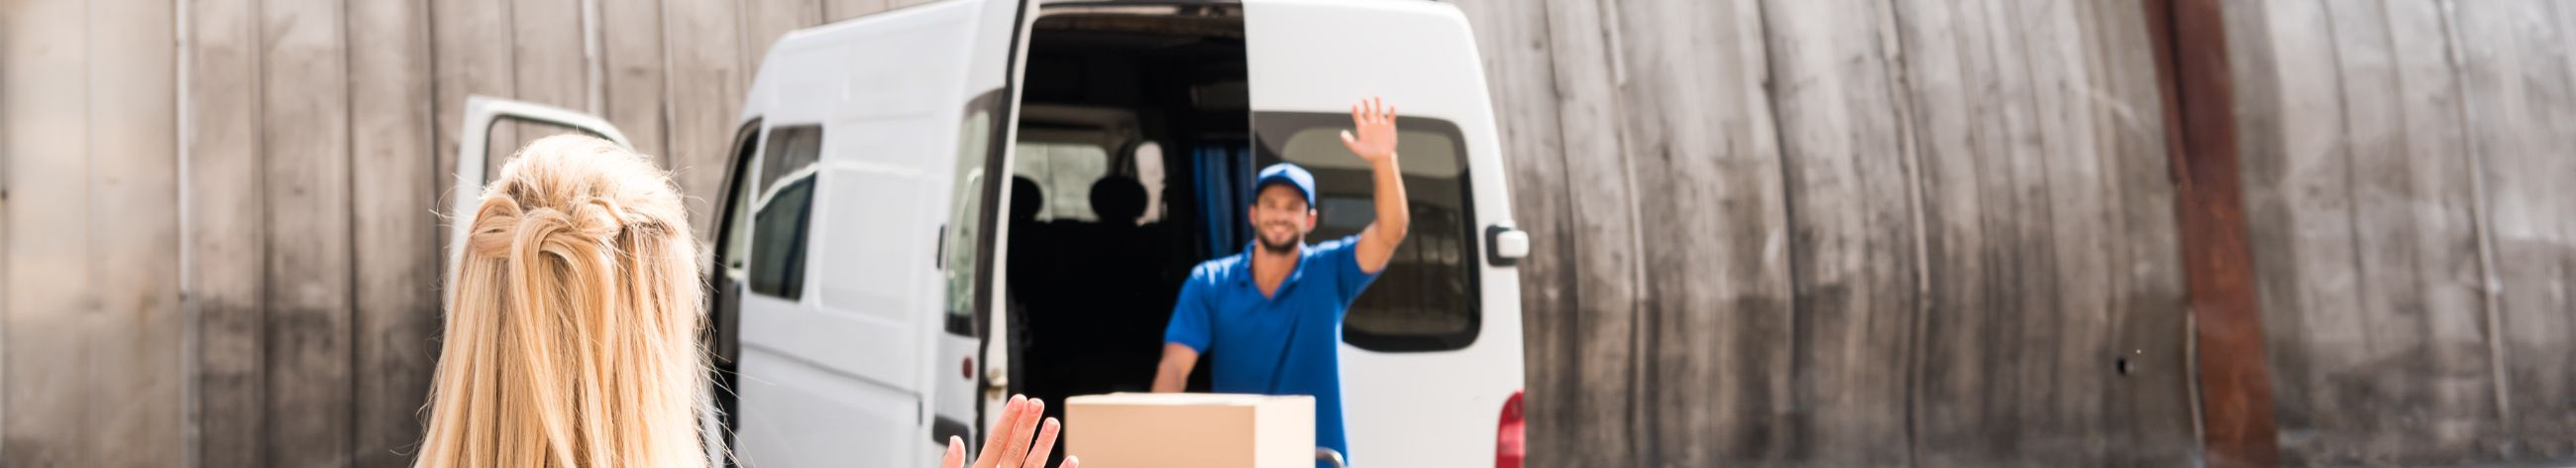 We offer reliable and efficient local logistics services tailored to meet the needs of our clients.